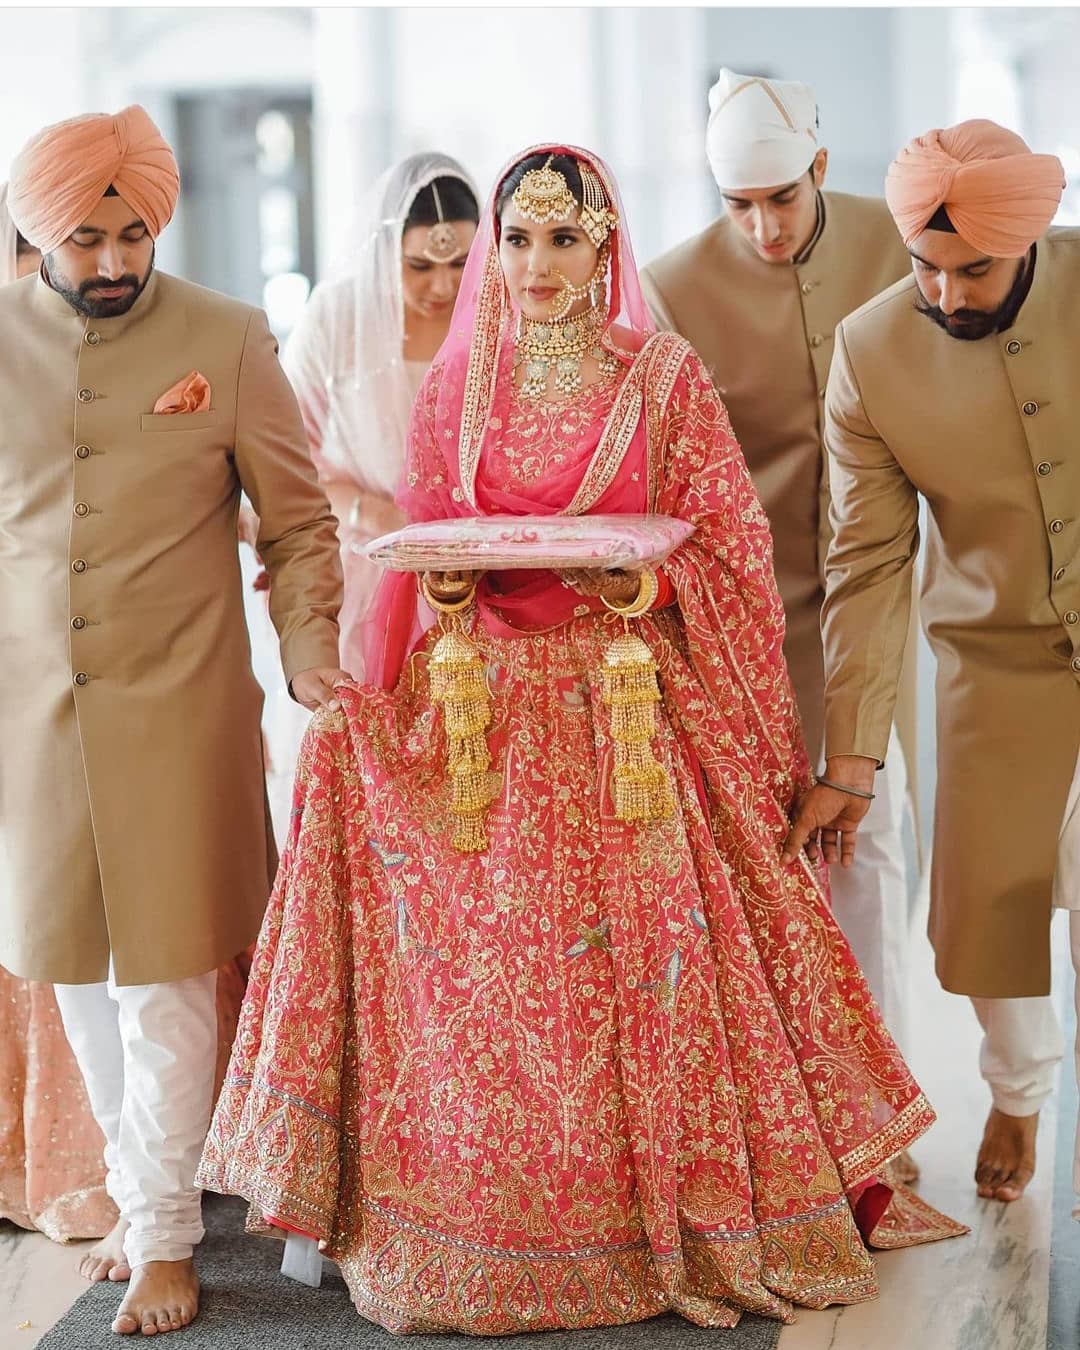 The new age Indian bride is paving her own path and how - Harpers bazaar